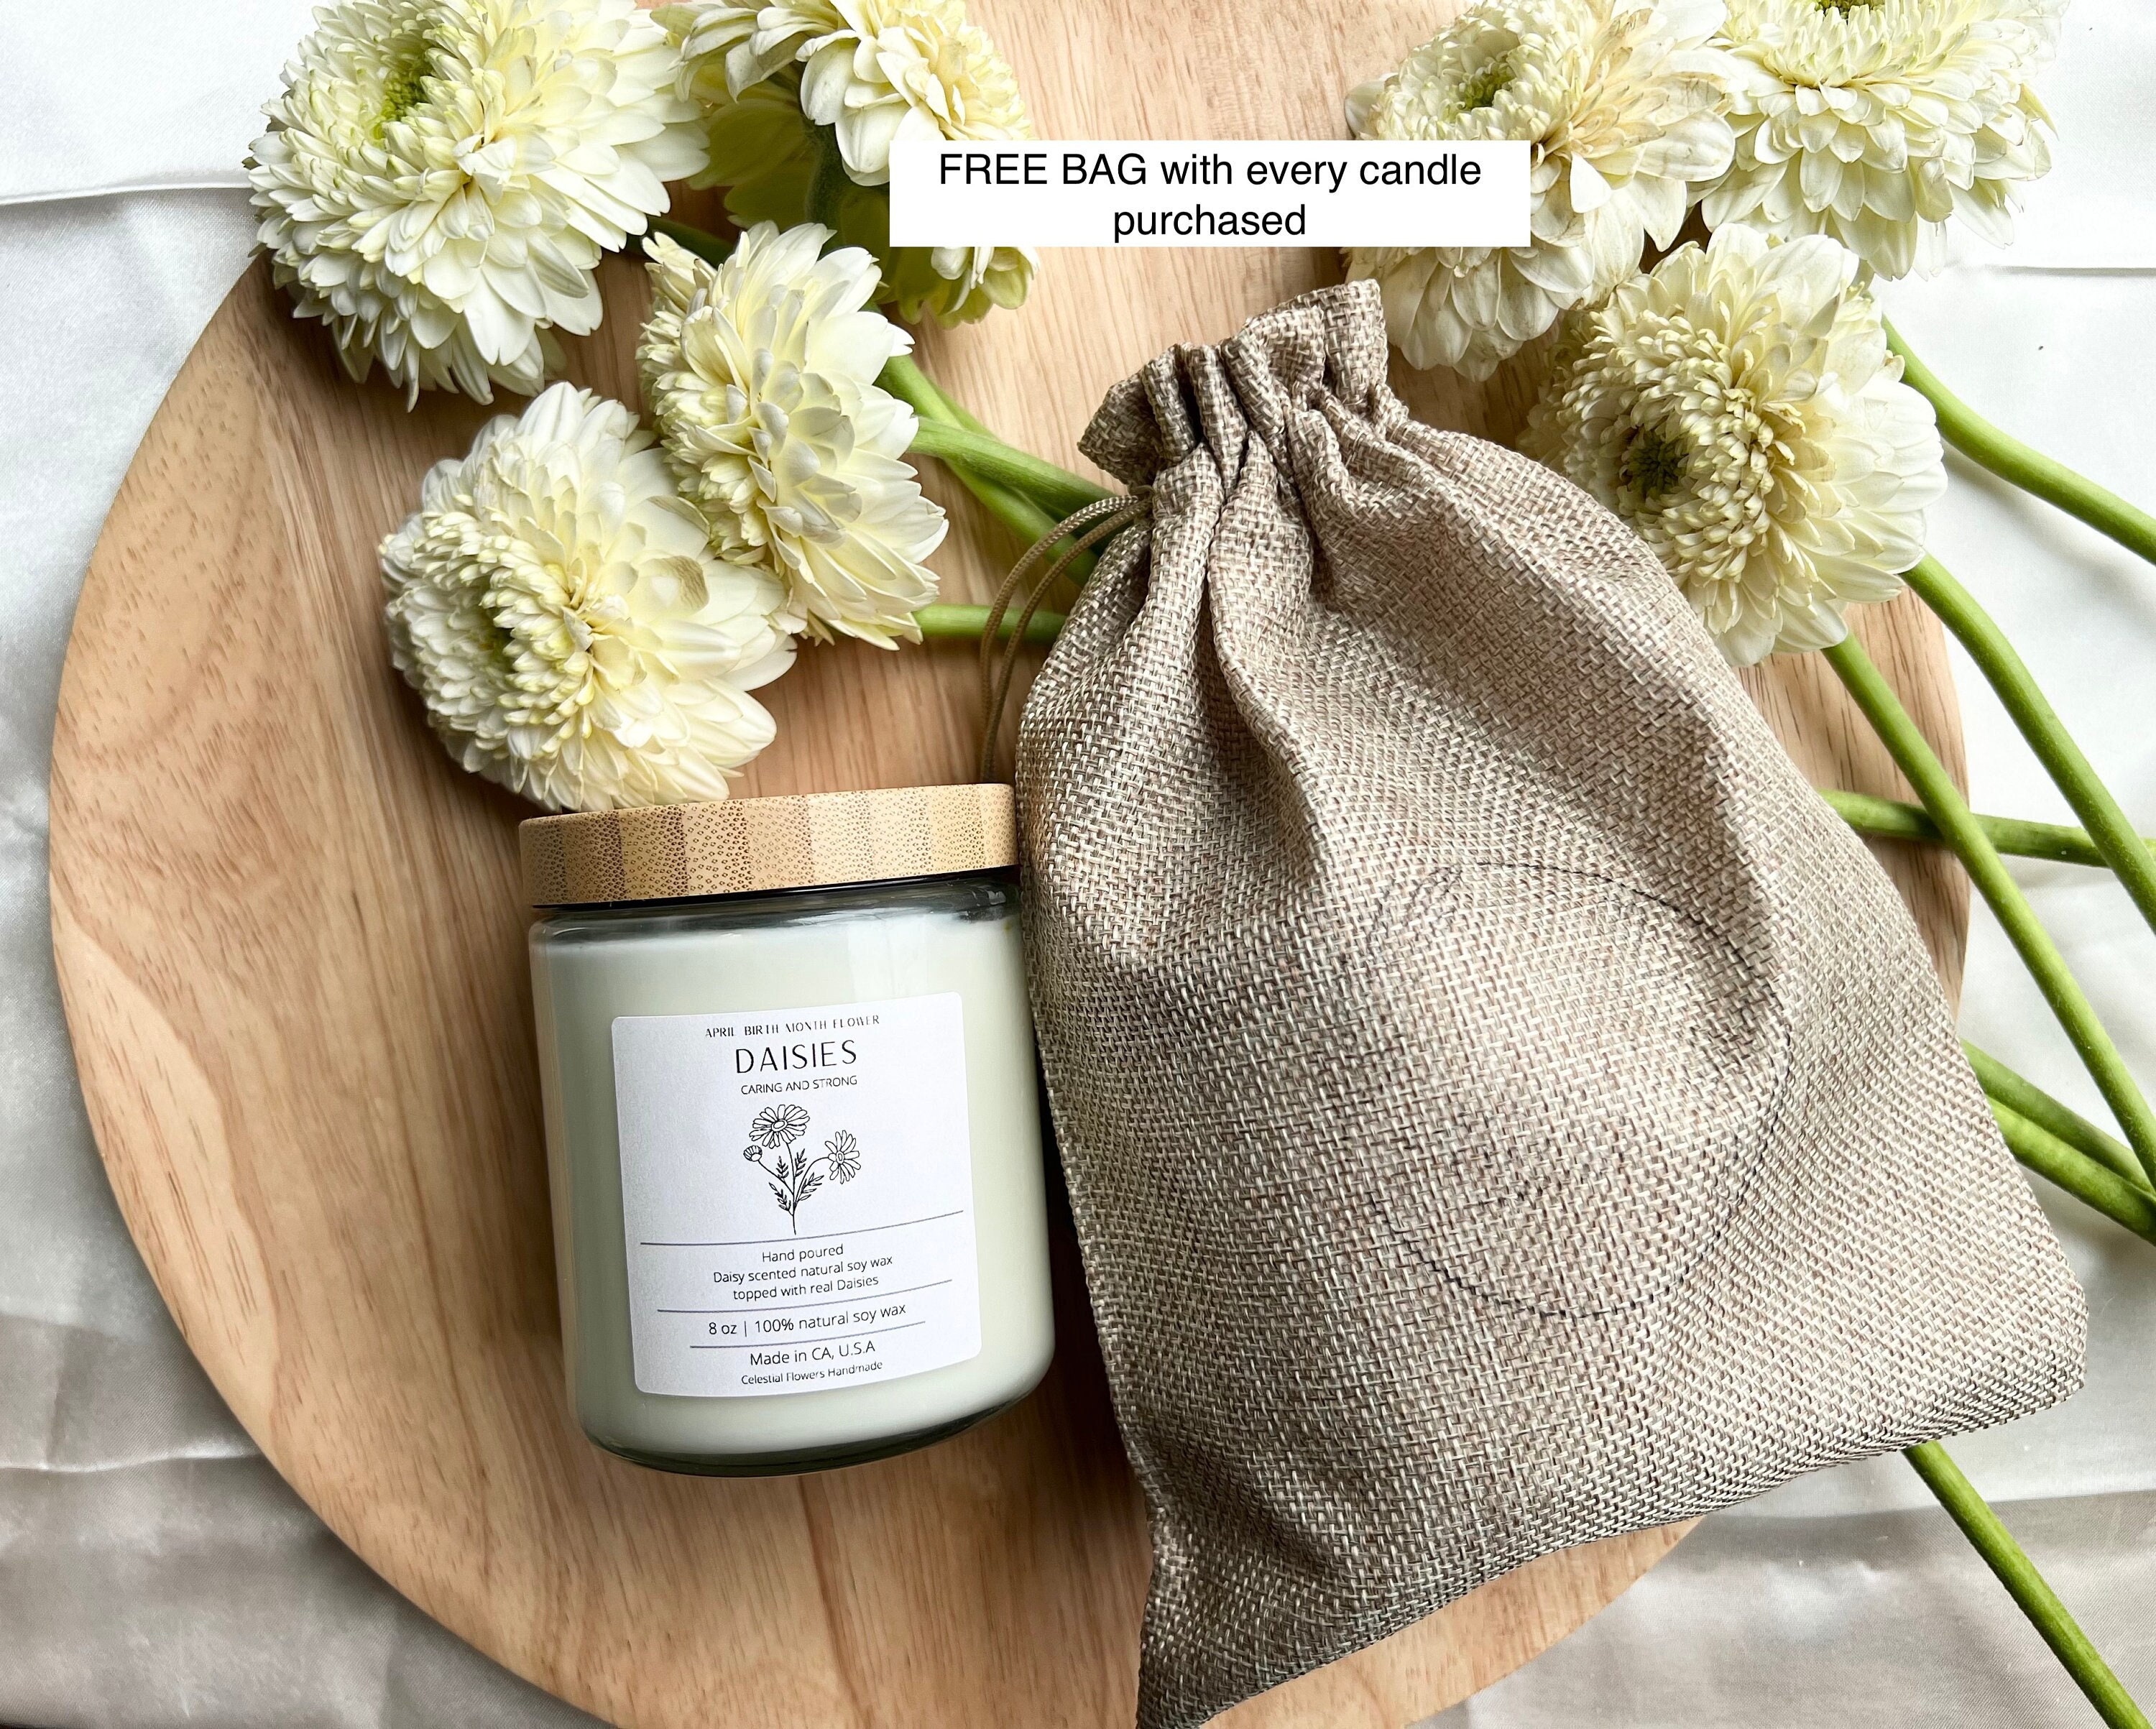 April Birth Month Flower Soy Candle